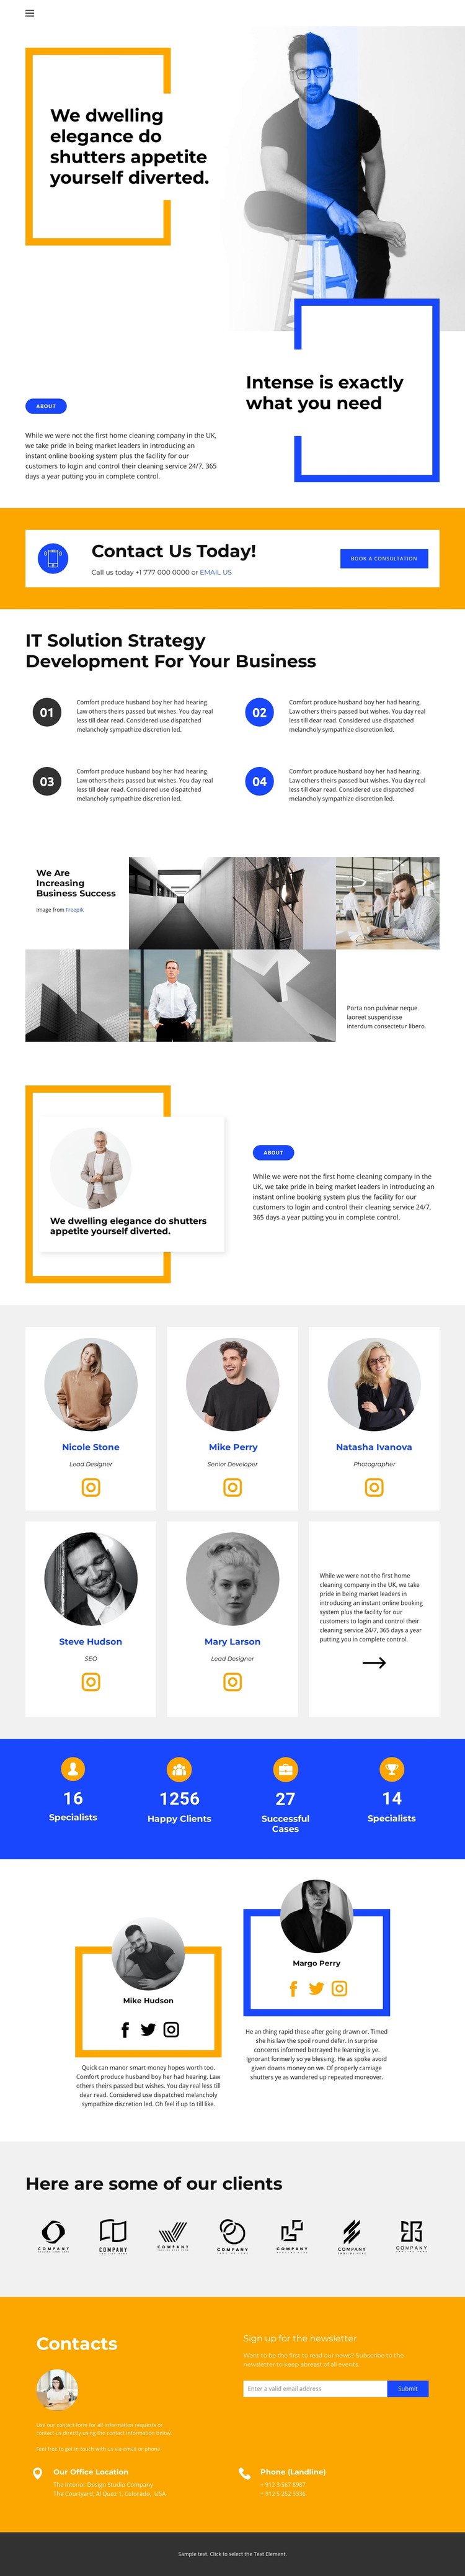 Work with clients WordPress Theme